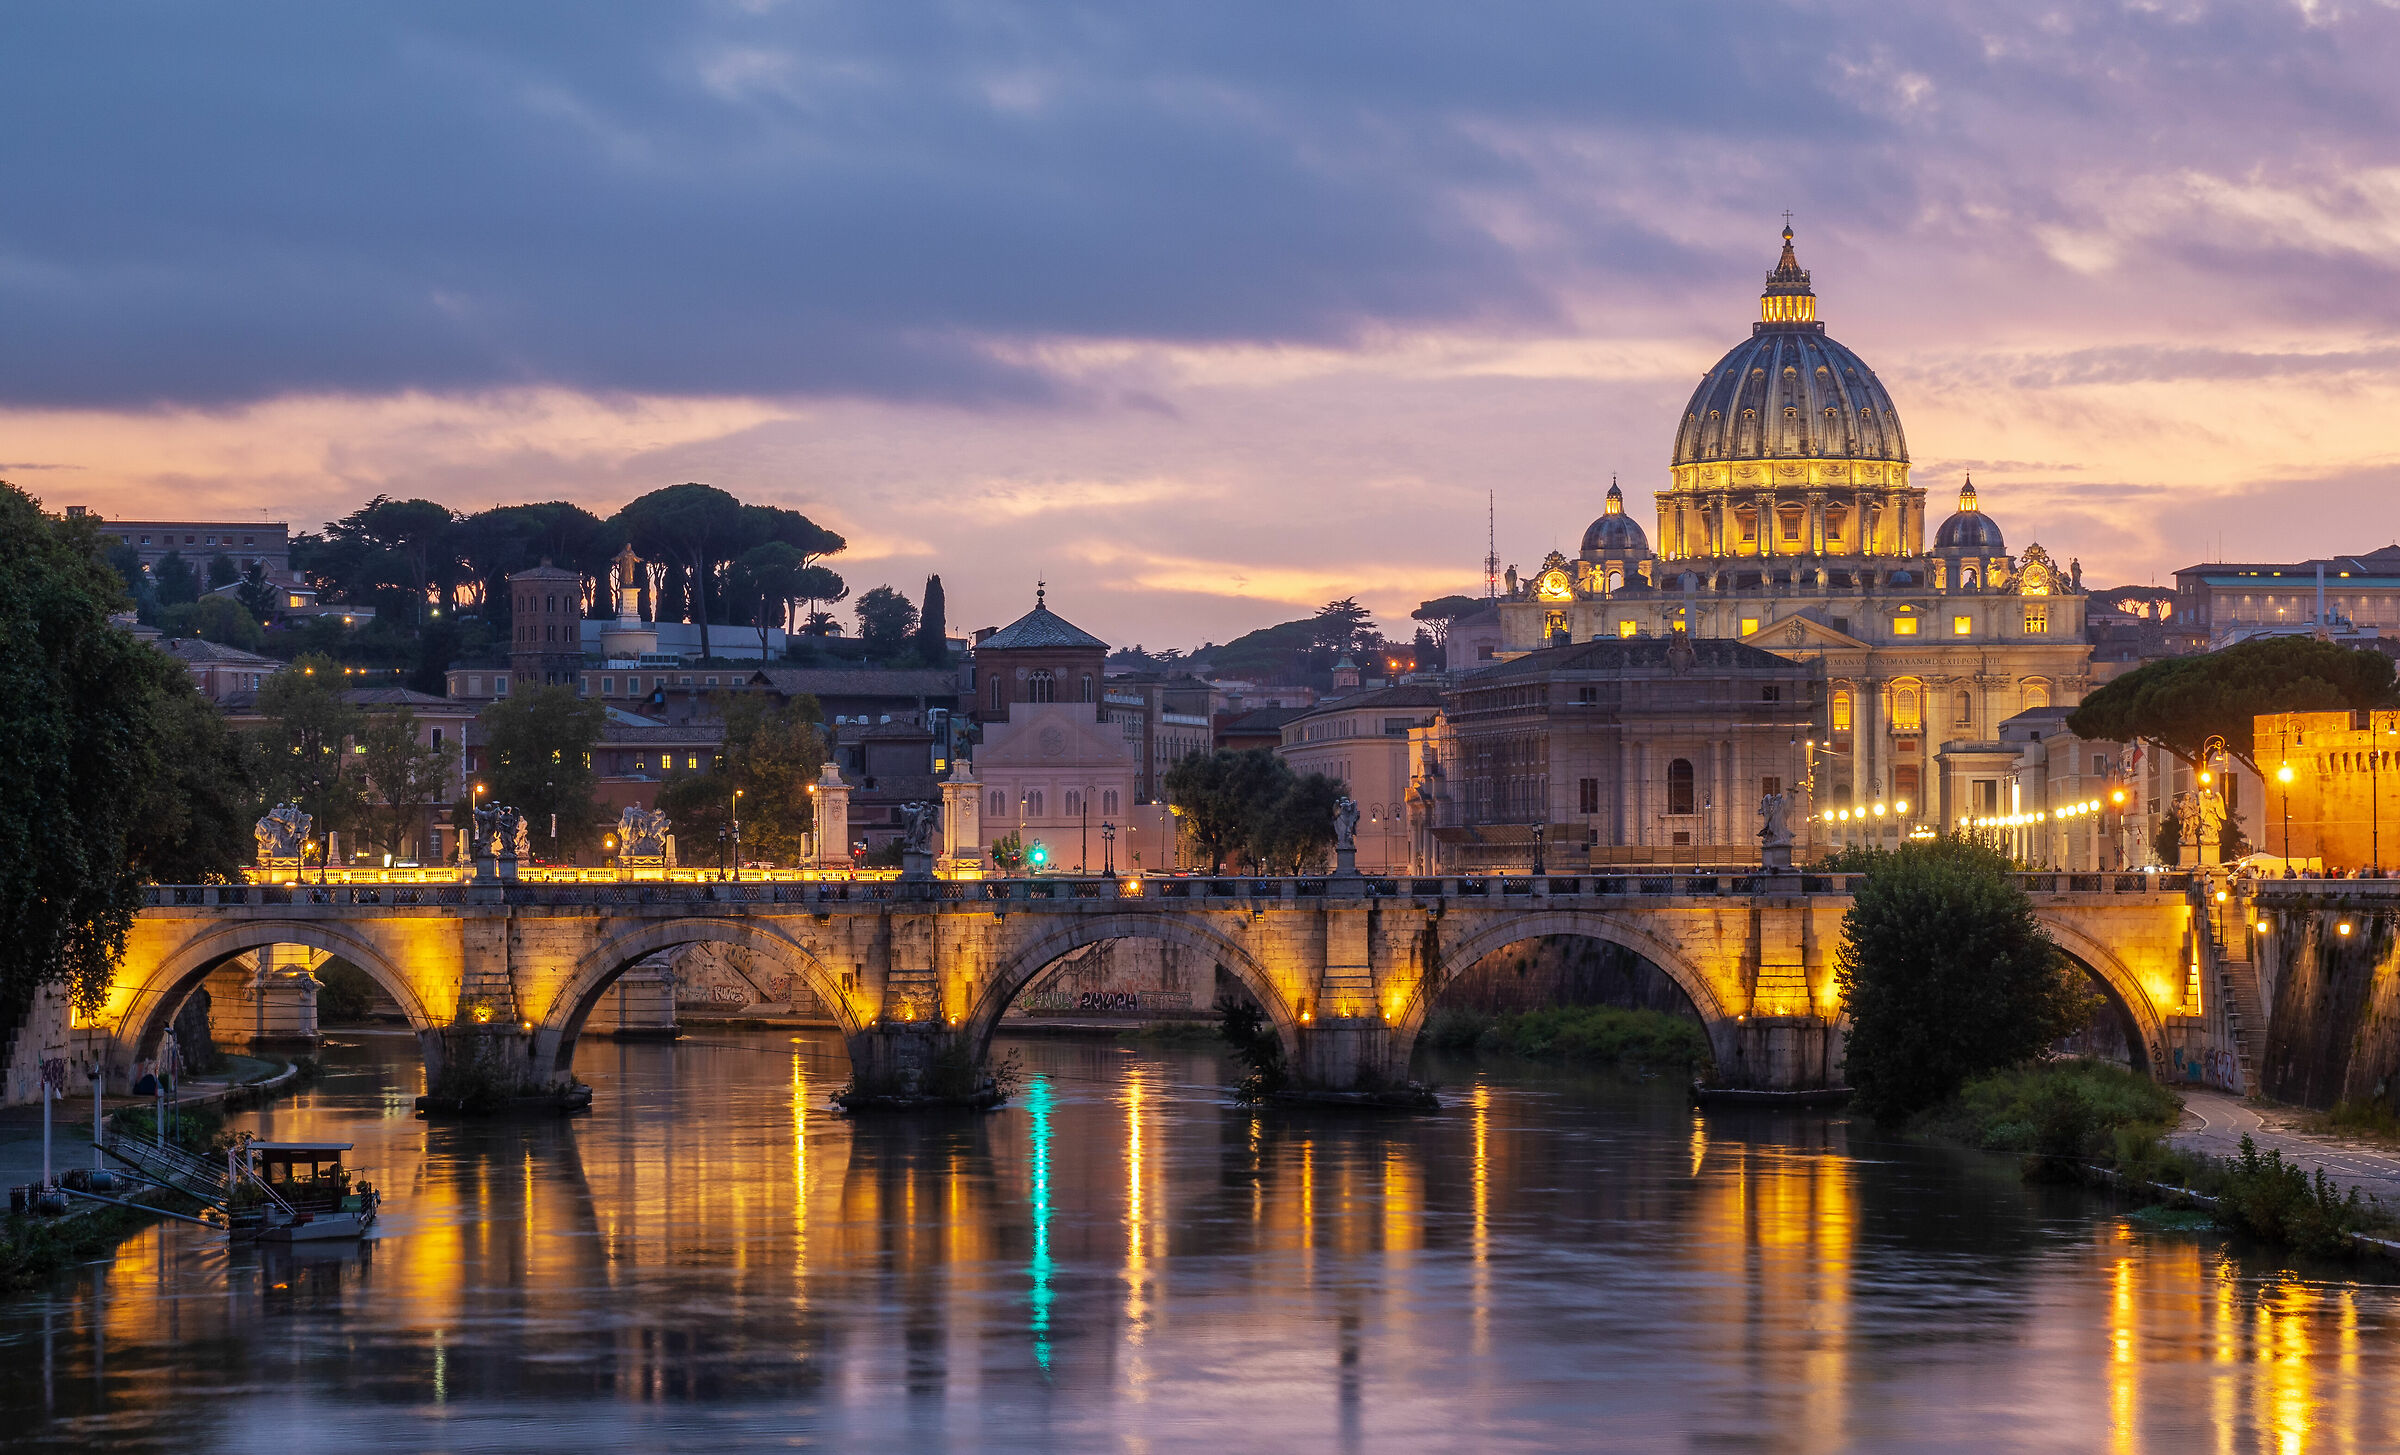 Sunset in Rome...